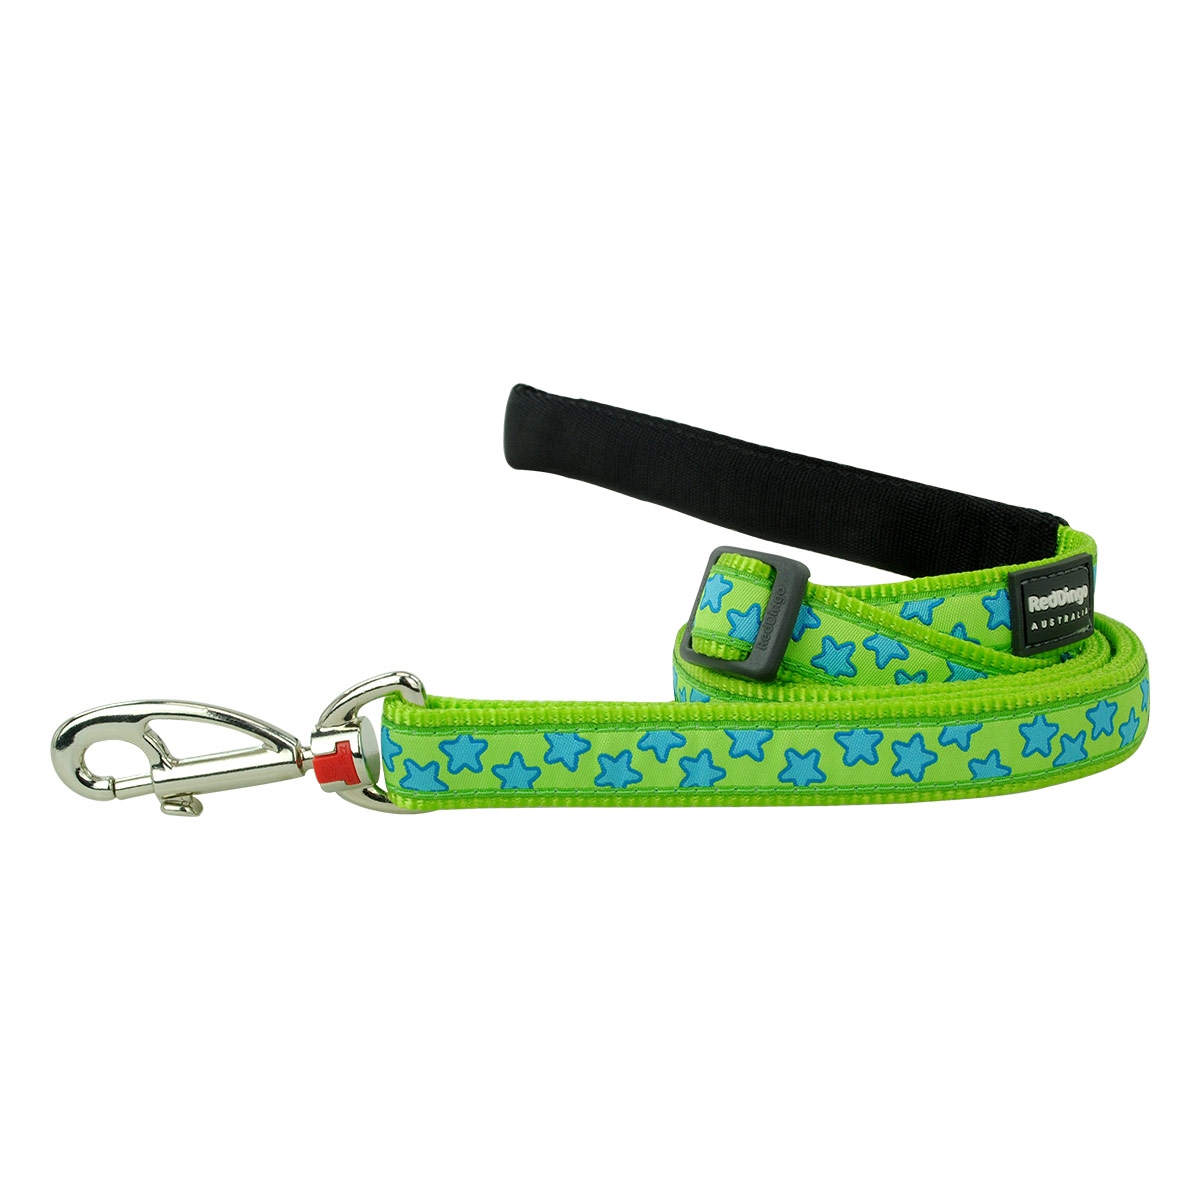 Picture of Red Dingo L6-ST-LG-15 Dog Lead Design Star Lime Green - Small 6ft